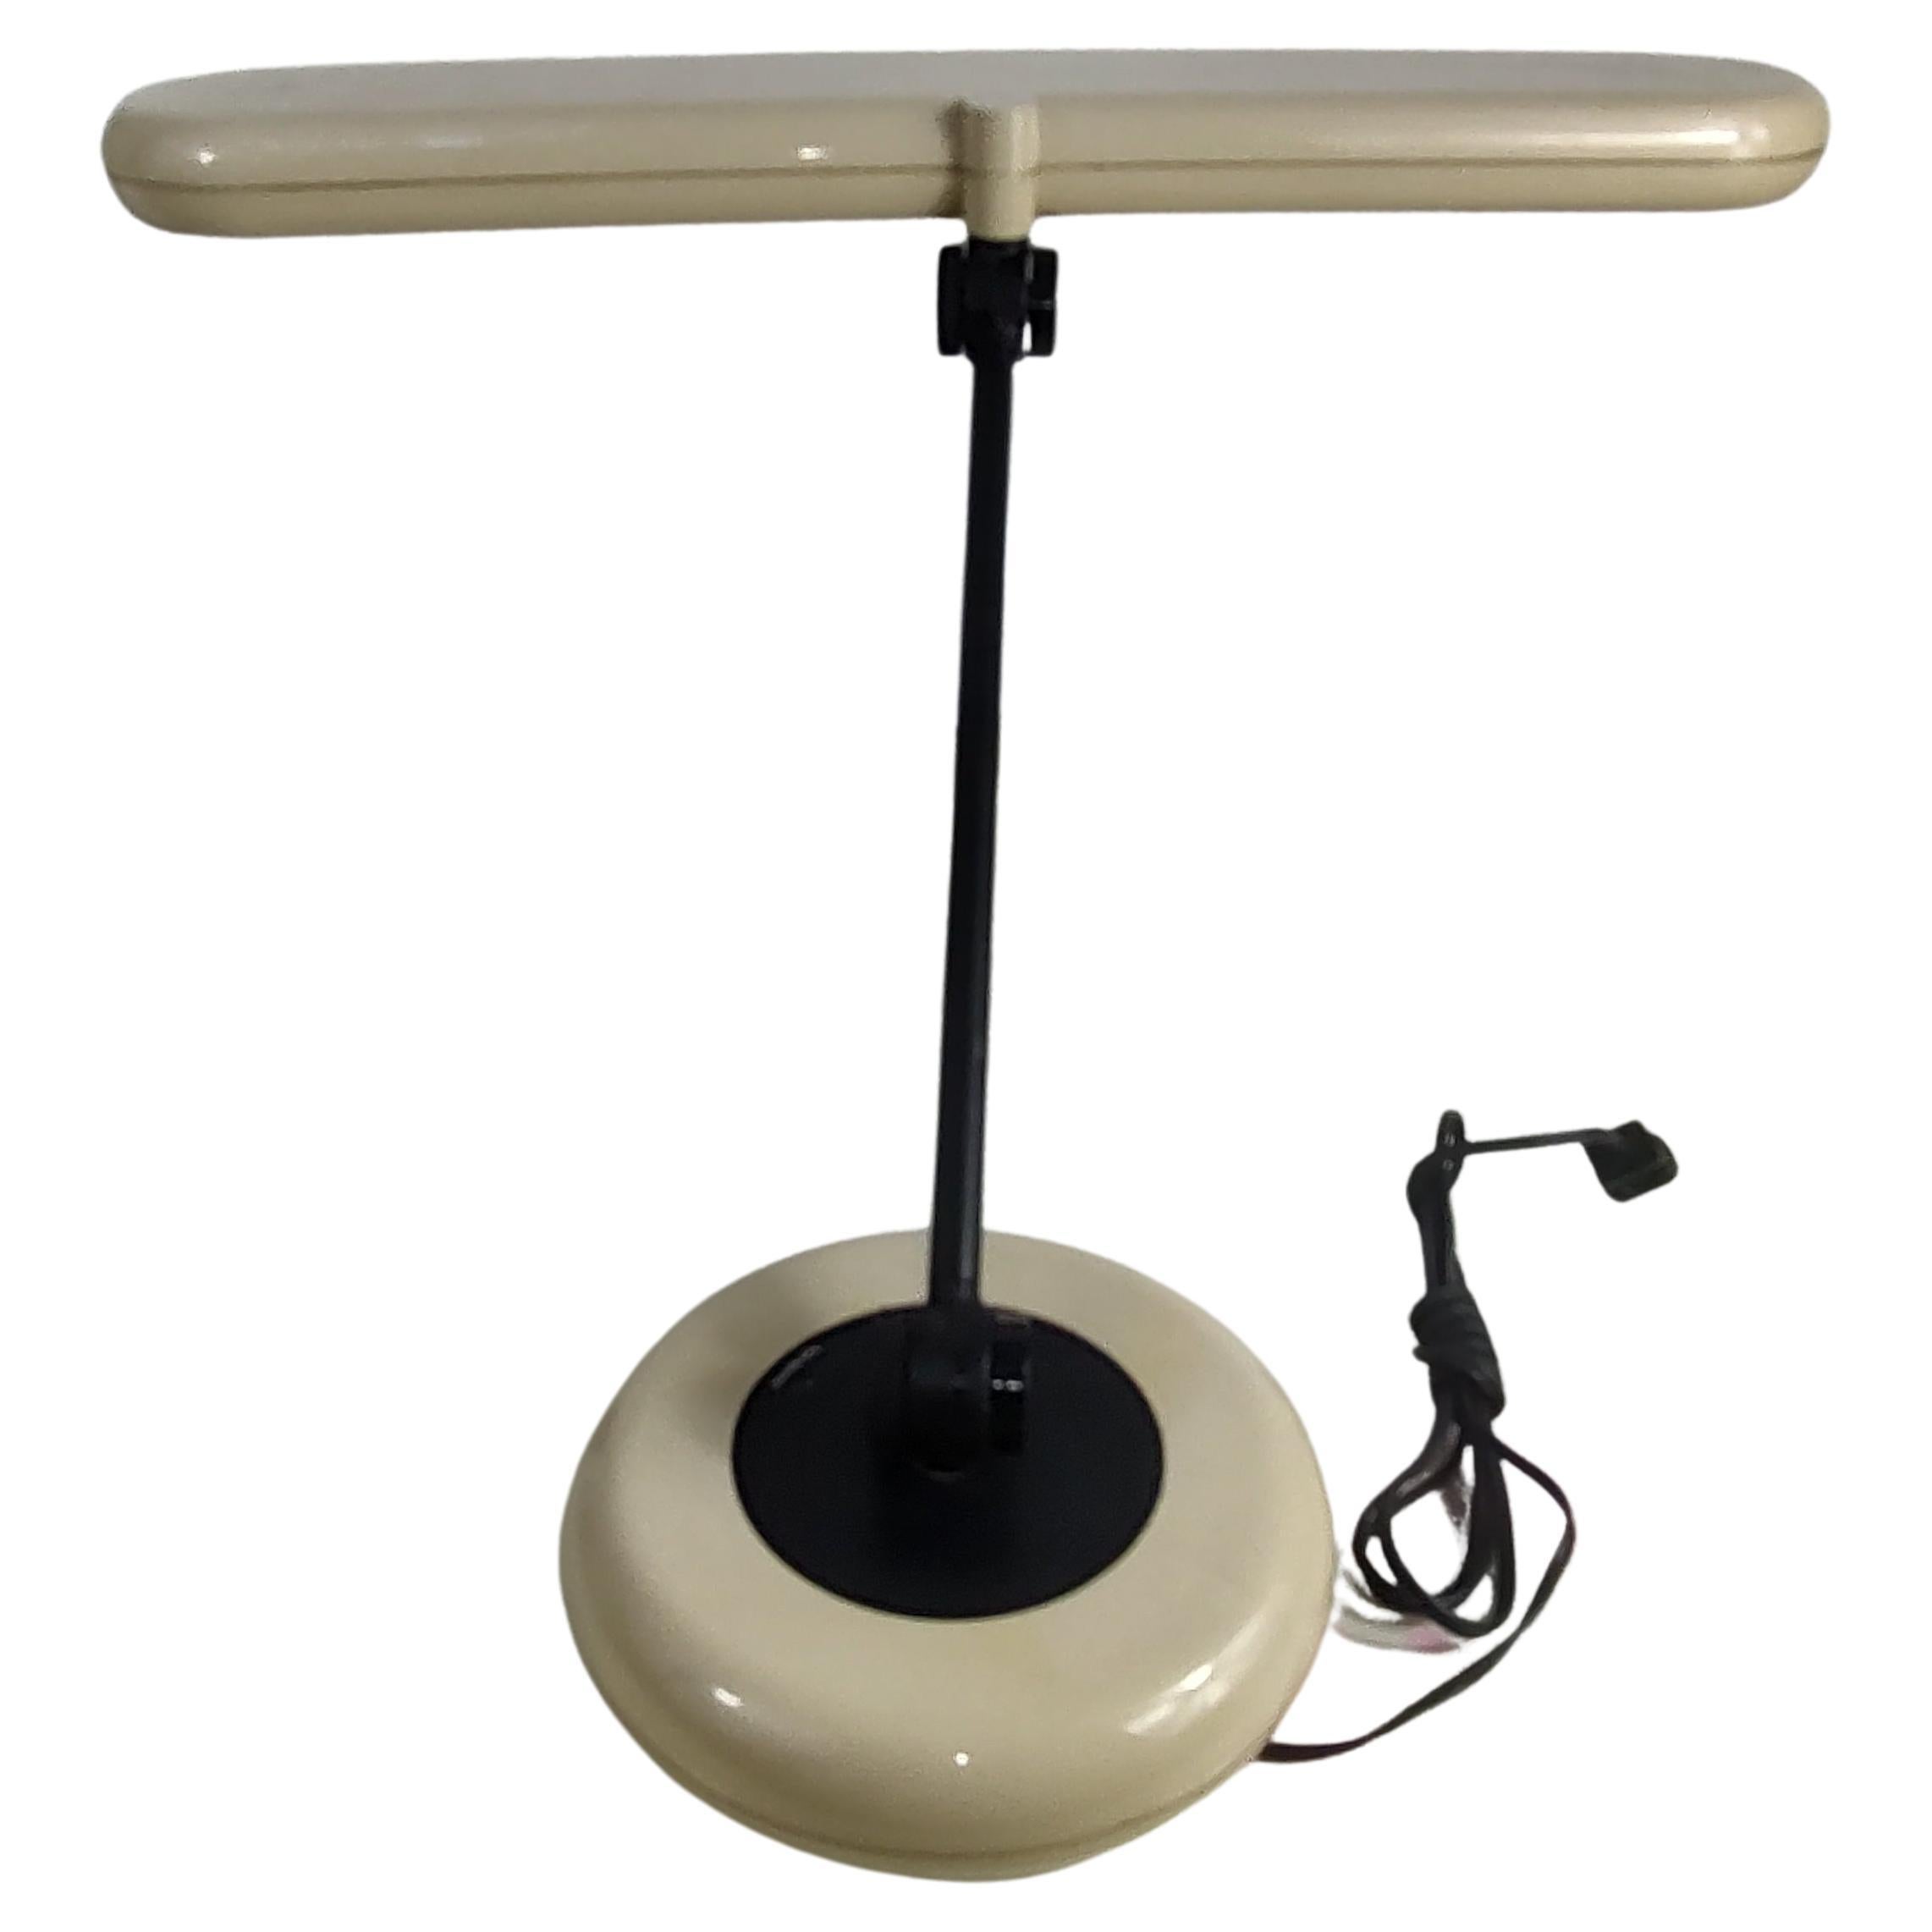 Molded Mid-Century Modern Sculptural Table Desk Lamp by Park Sherman